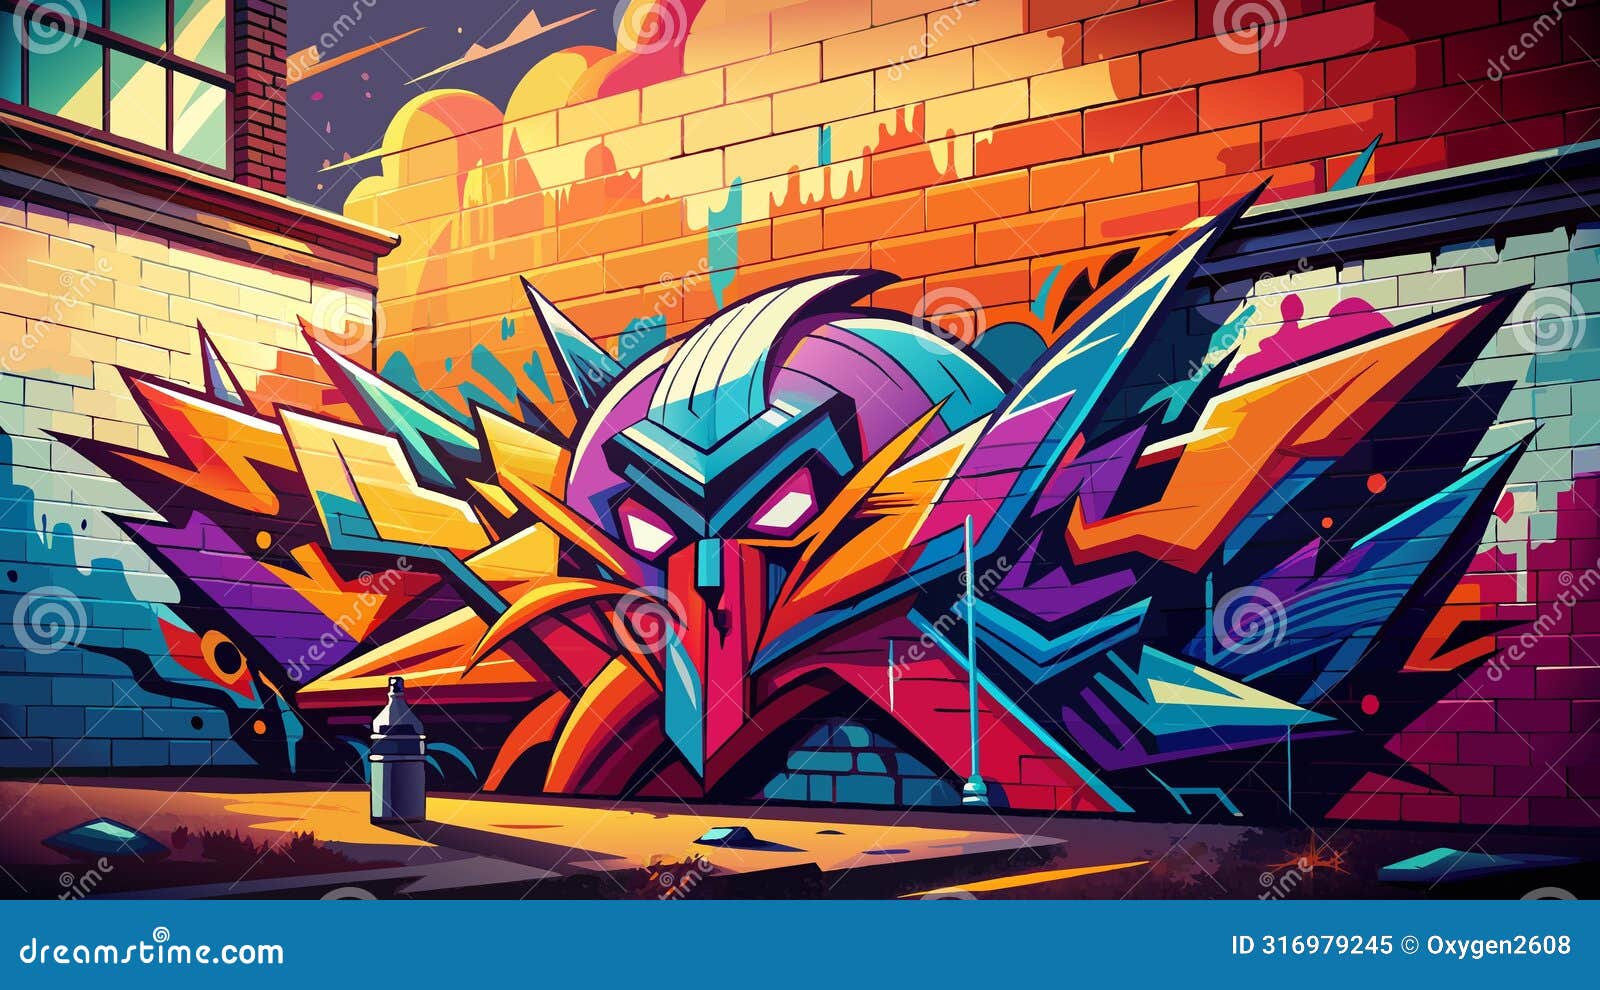 vibrant street art mural with abstract graffiti 